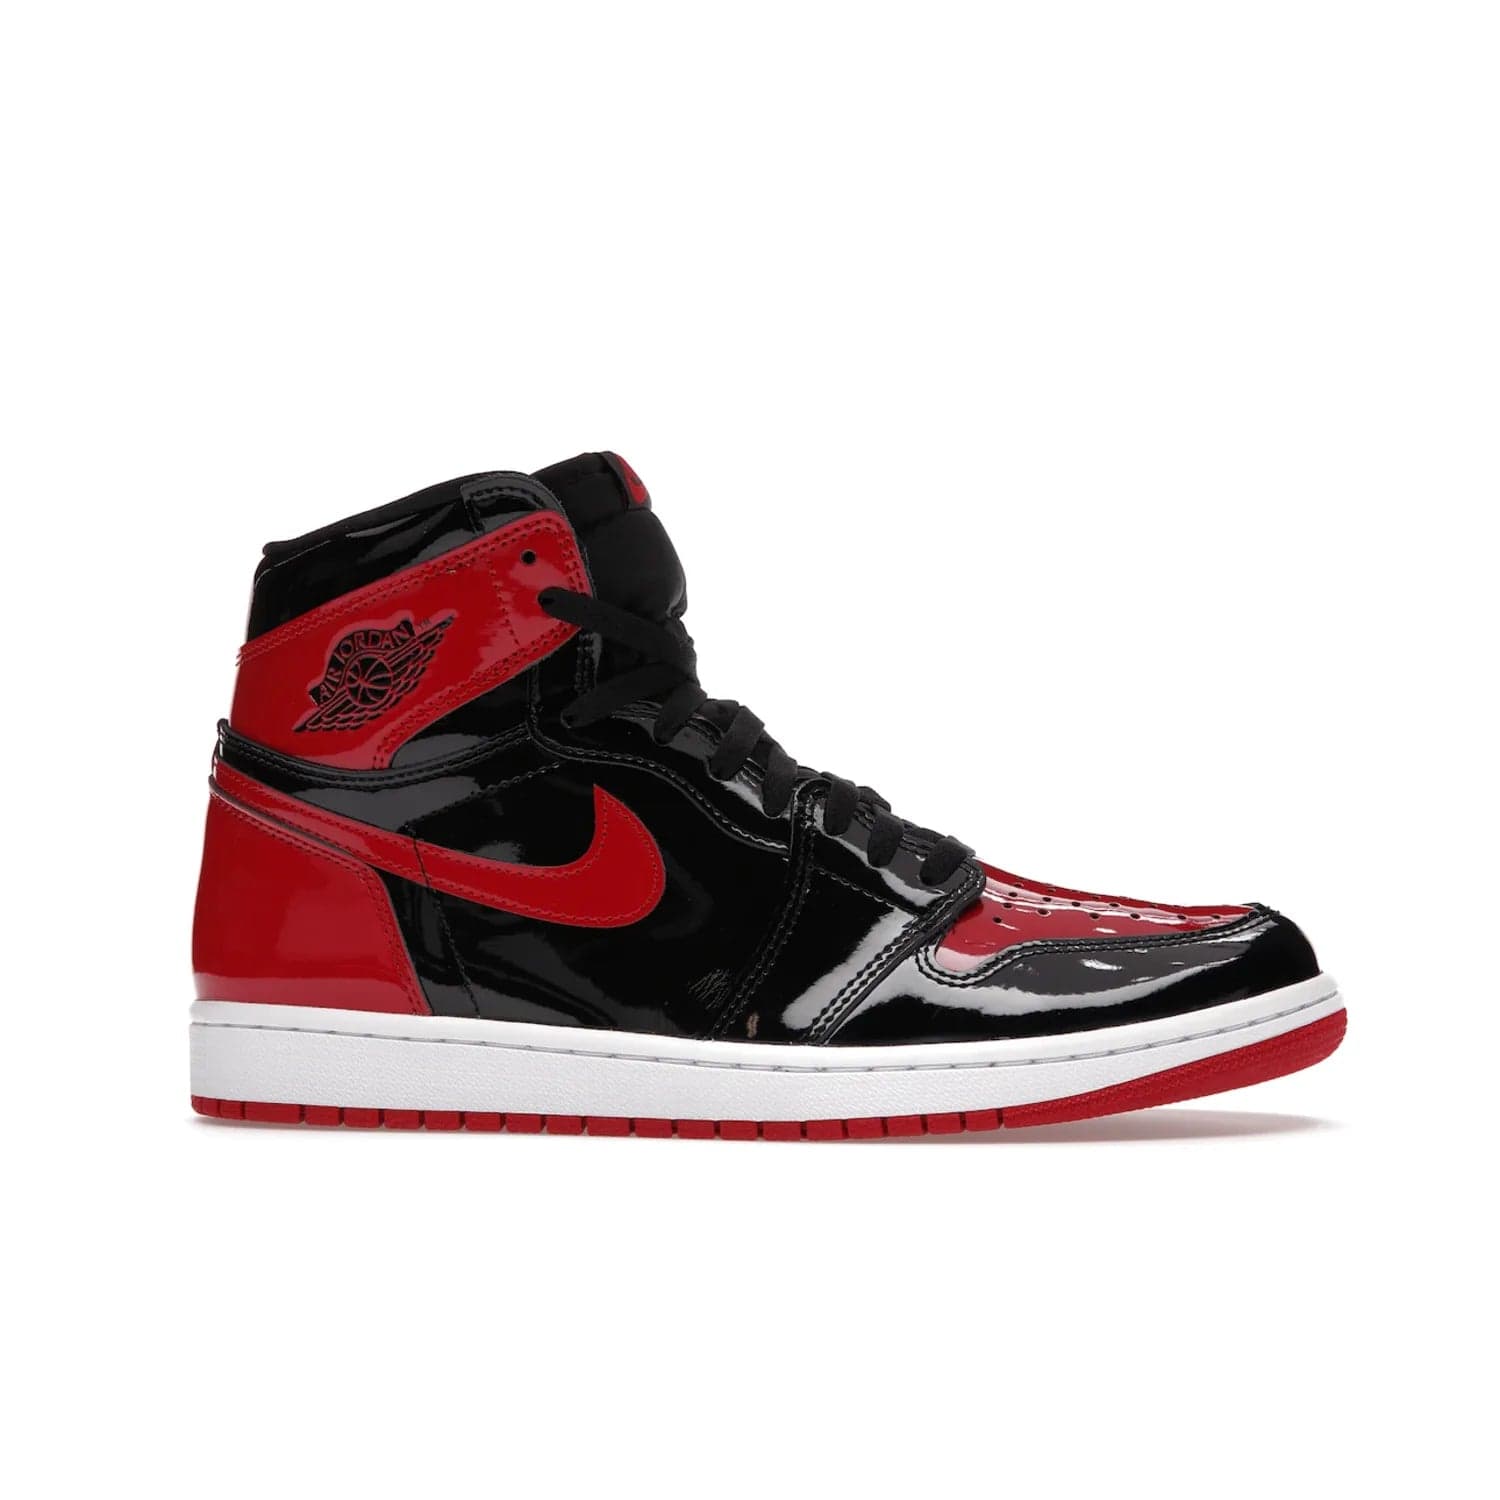 Jordan 1 Retro High OG Patent Bred - Image 2 - Only at www.BallersClubKickz.com - Introducing Air Jordan 1 Retro High OG Patent Bred - sleek patent leather upper, signature weaved Nike Air tongue and classic Wings logo on collar. Red and white sole complete signature look. Releasing December 2021 - perfect retro edition for holidays.